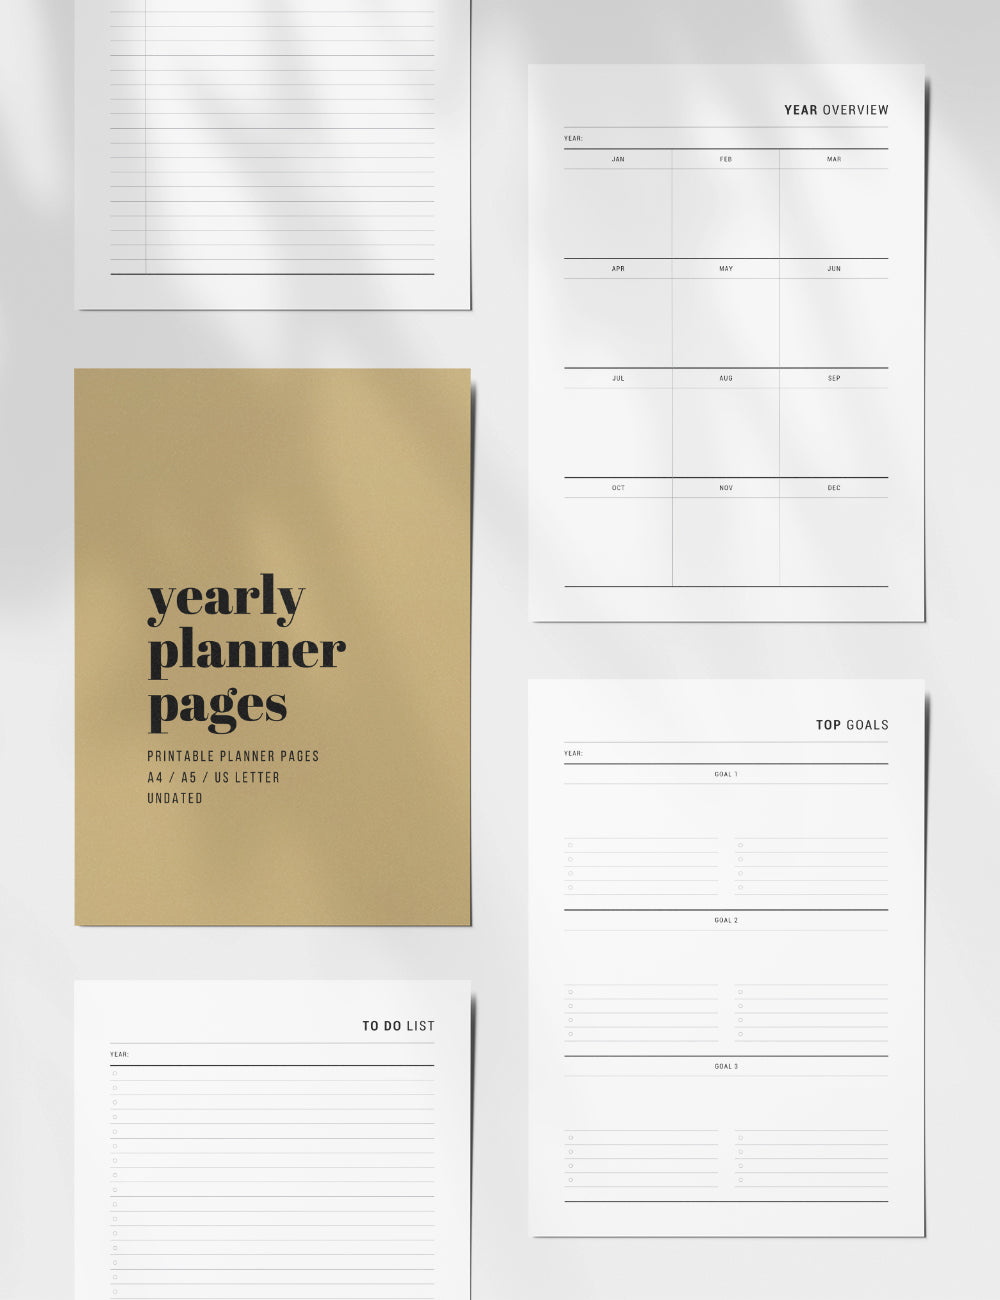 Printable Yearly Planner | Undated | A4 | A5 | US Letter | PDF + JPEG